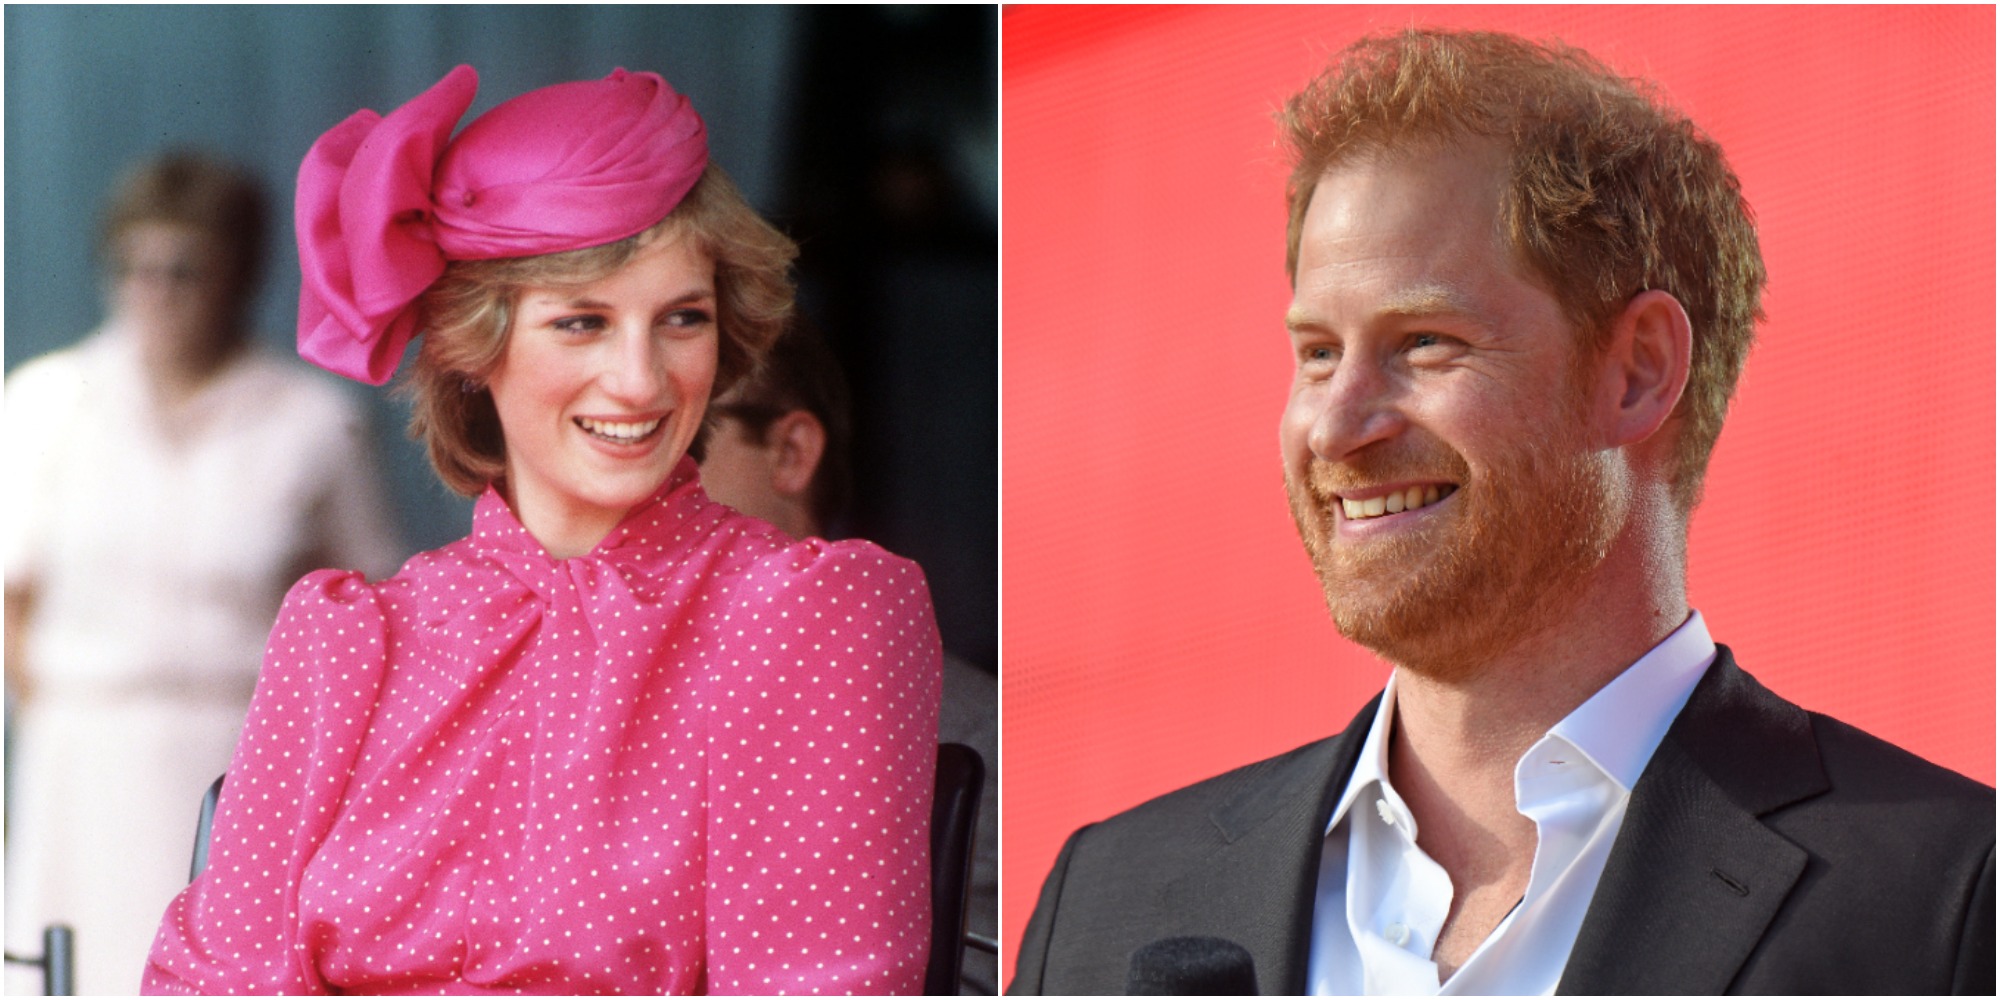 Princess Diana and Prince Harry smile in side-by-side images.